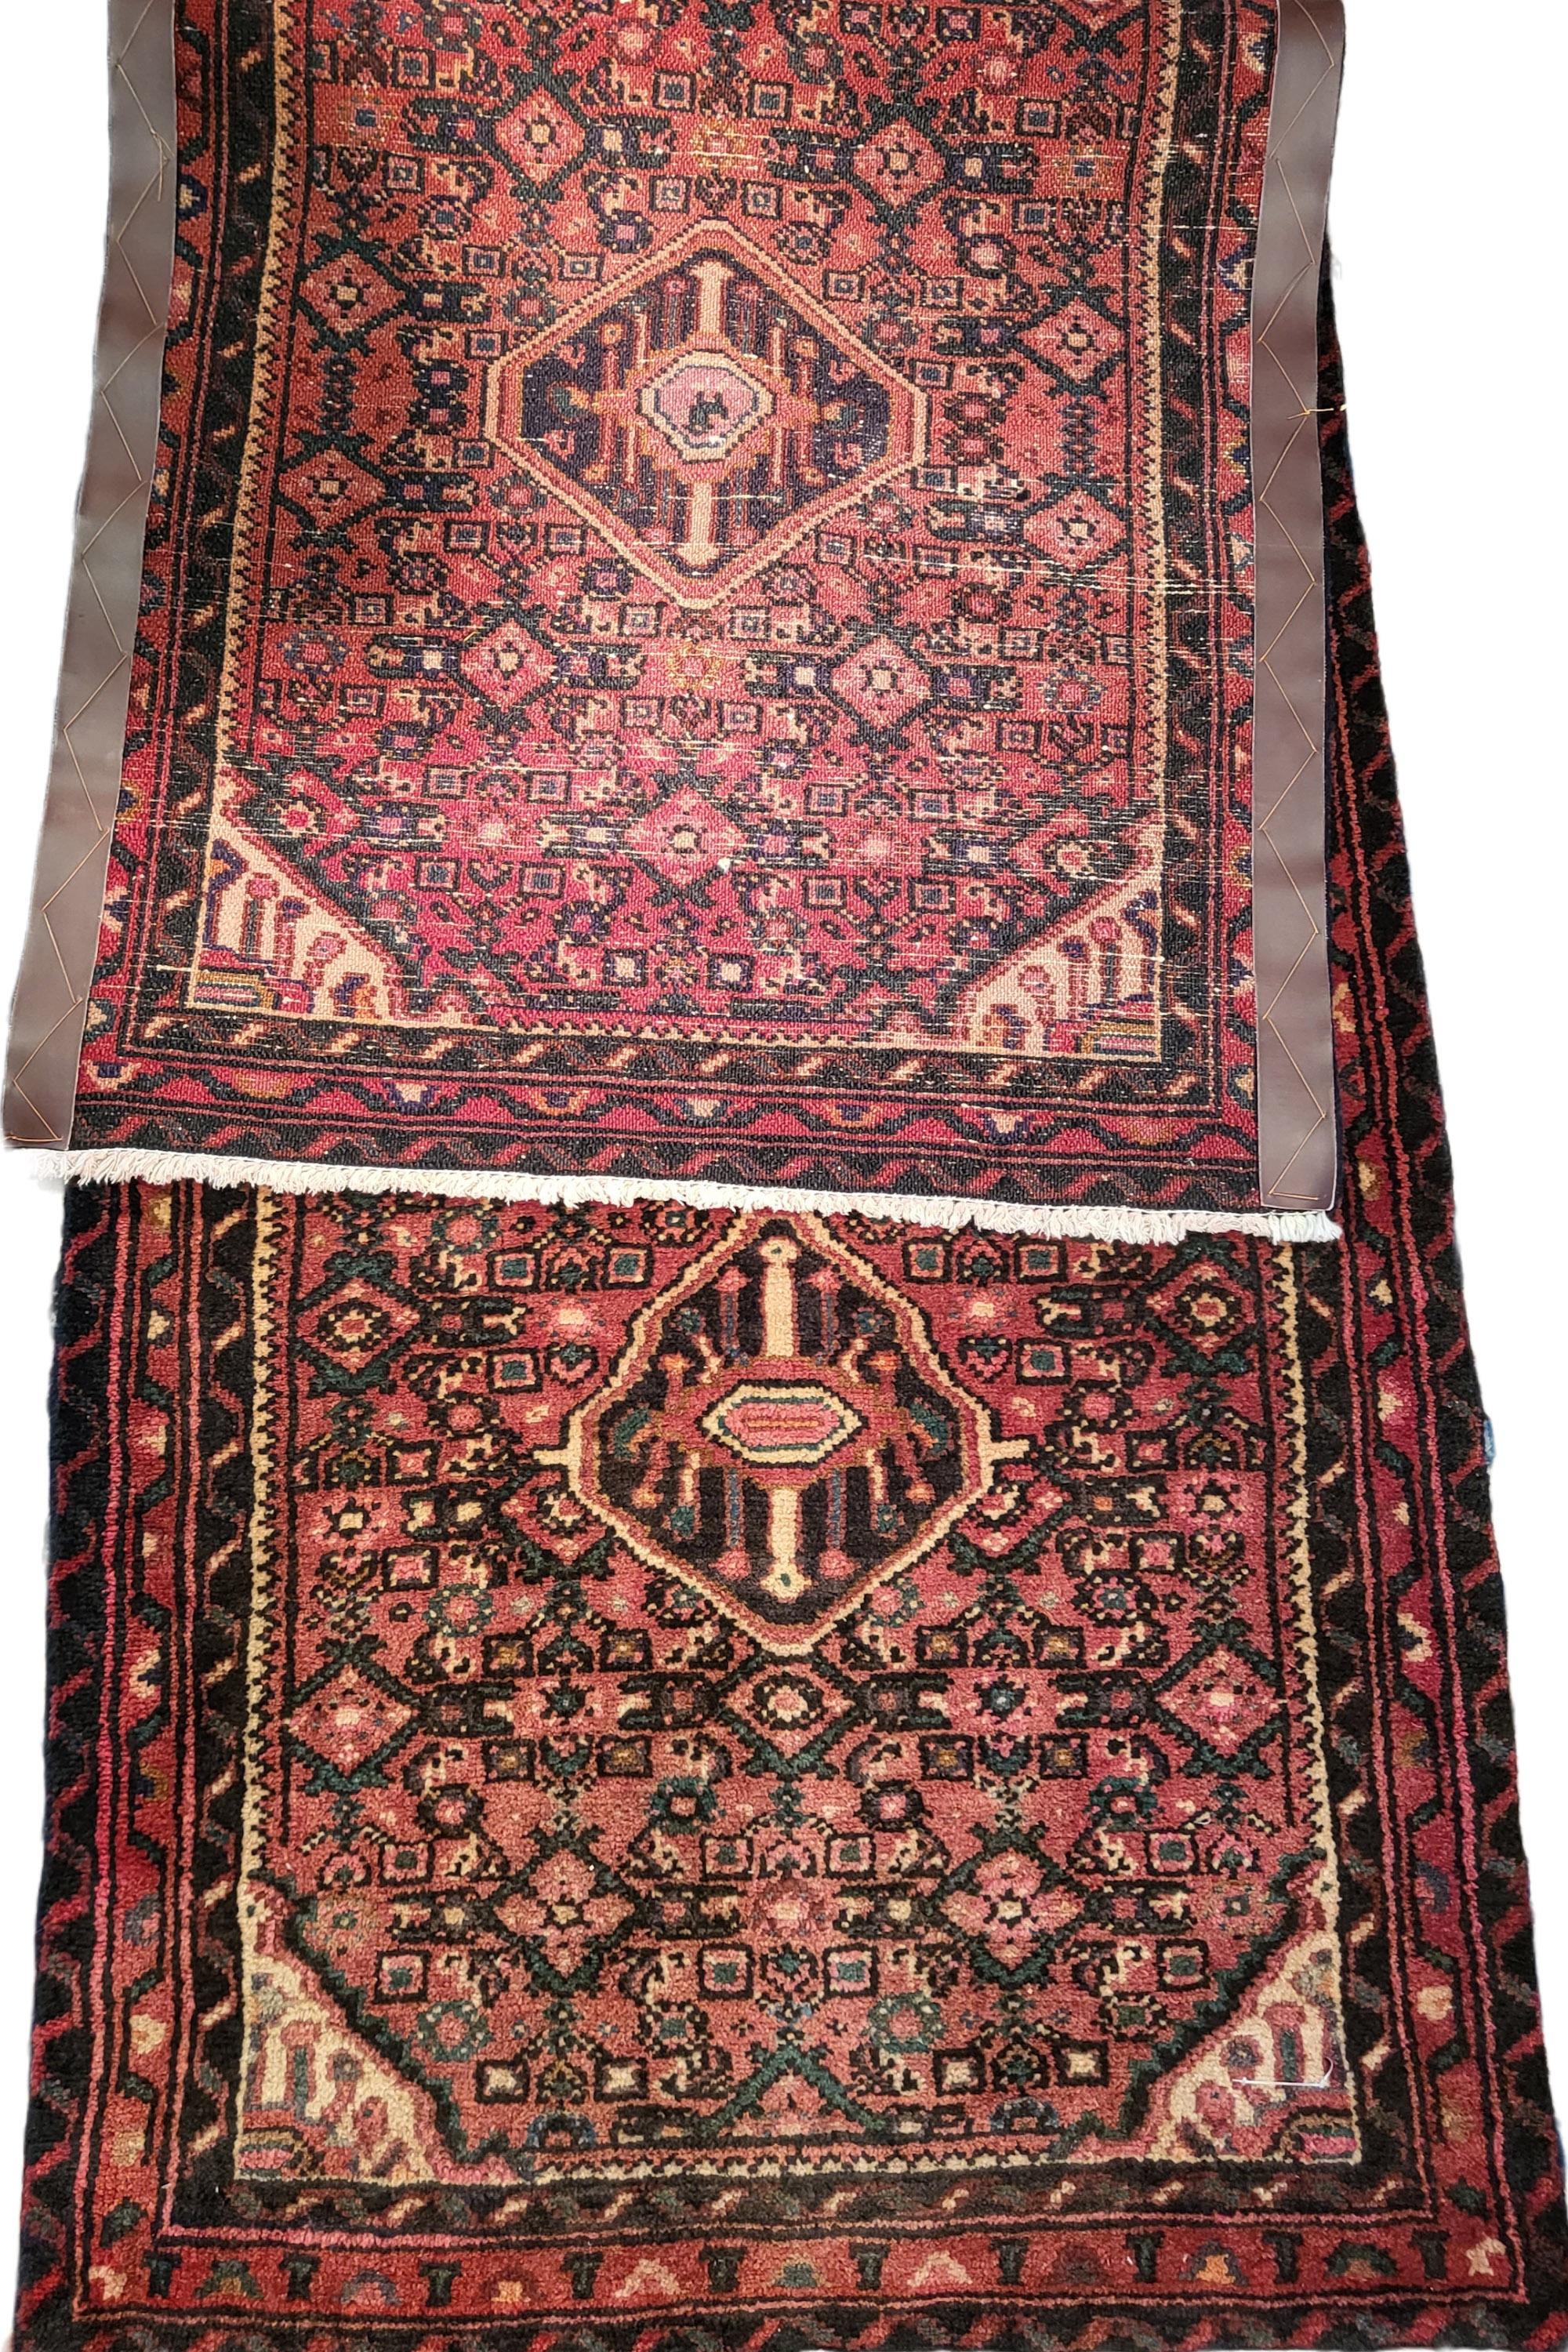 Incredible 1960's Persian Hussen Abad 2'3 x 6'6 - Runner

Comprised of fine Persian wool skillfully handwoven in the western part of Iran.

This piece features the signature styling of the region that is reminiscent of Hamadan and Malayer. The